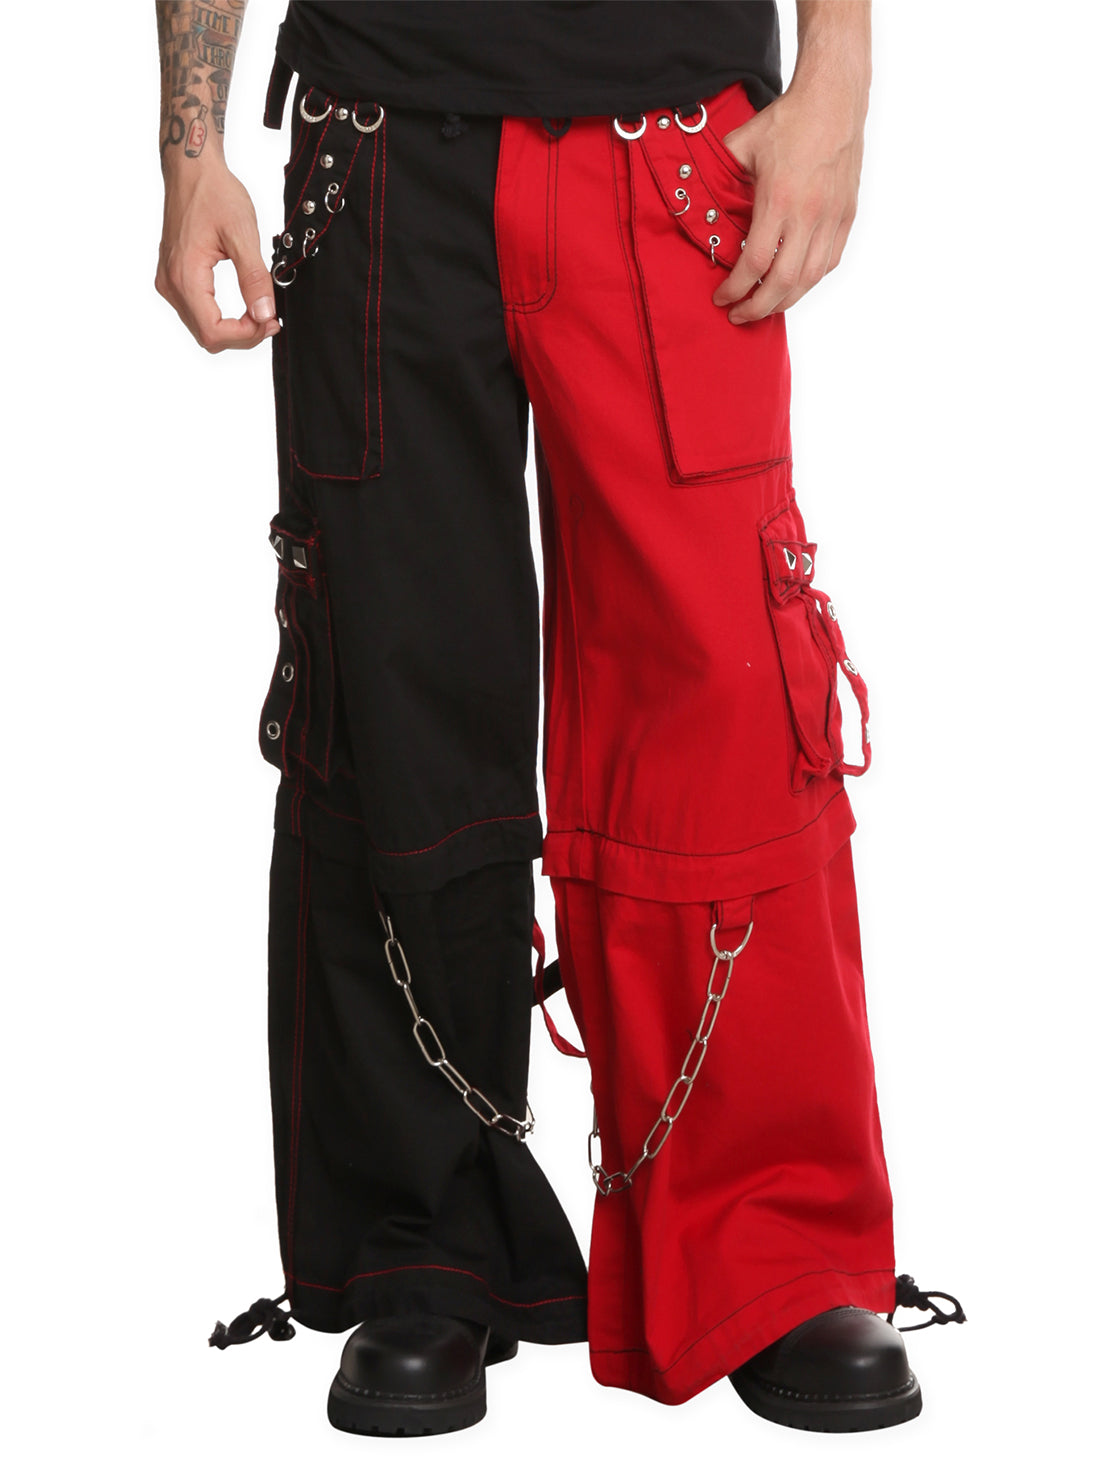 Tripp Red & Black Two Tone Split Leg Pants with Zip Off Legs to Shorts